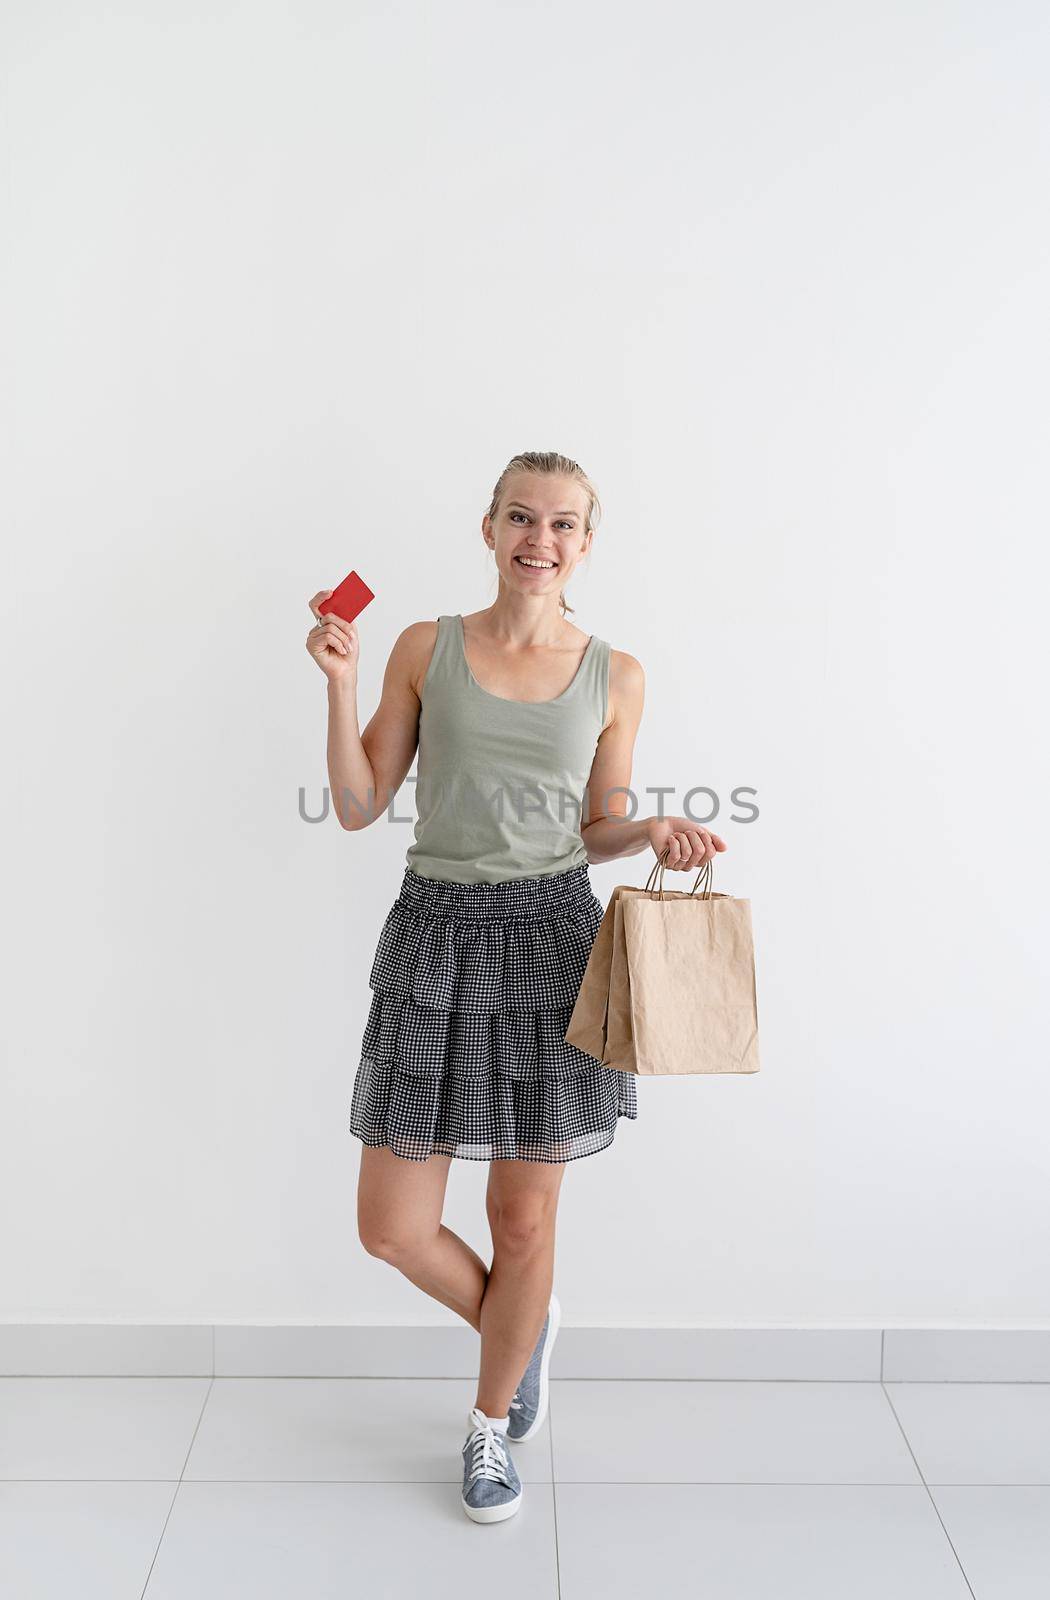 Online shopping concept. Young smiling woman holding eco friendly shopping bags and creadit card. Mock up